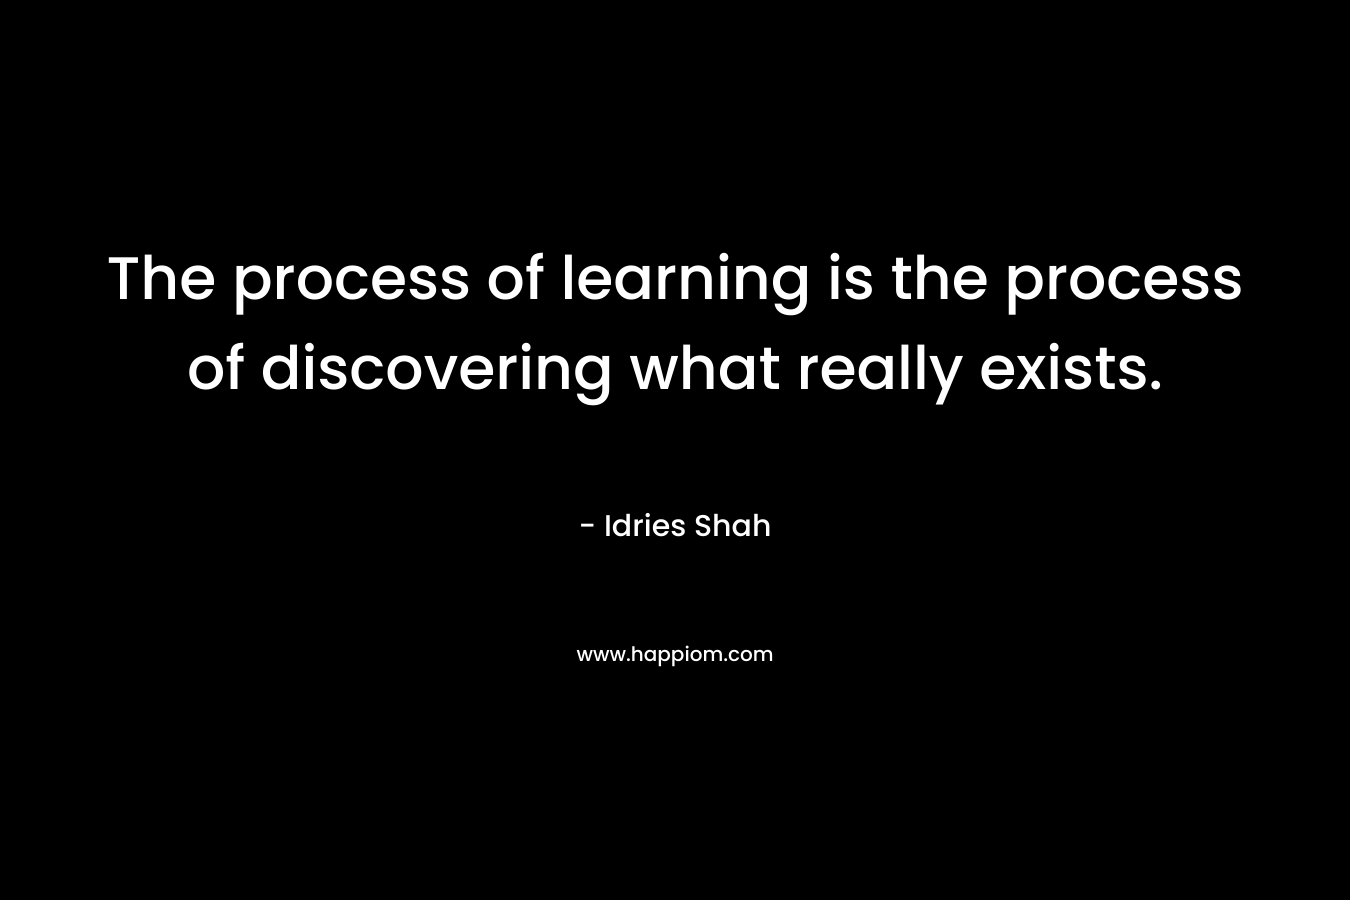 The process of learning is the process of discovering what really exists.